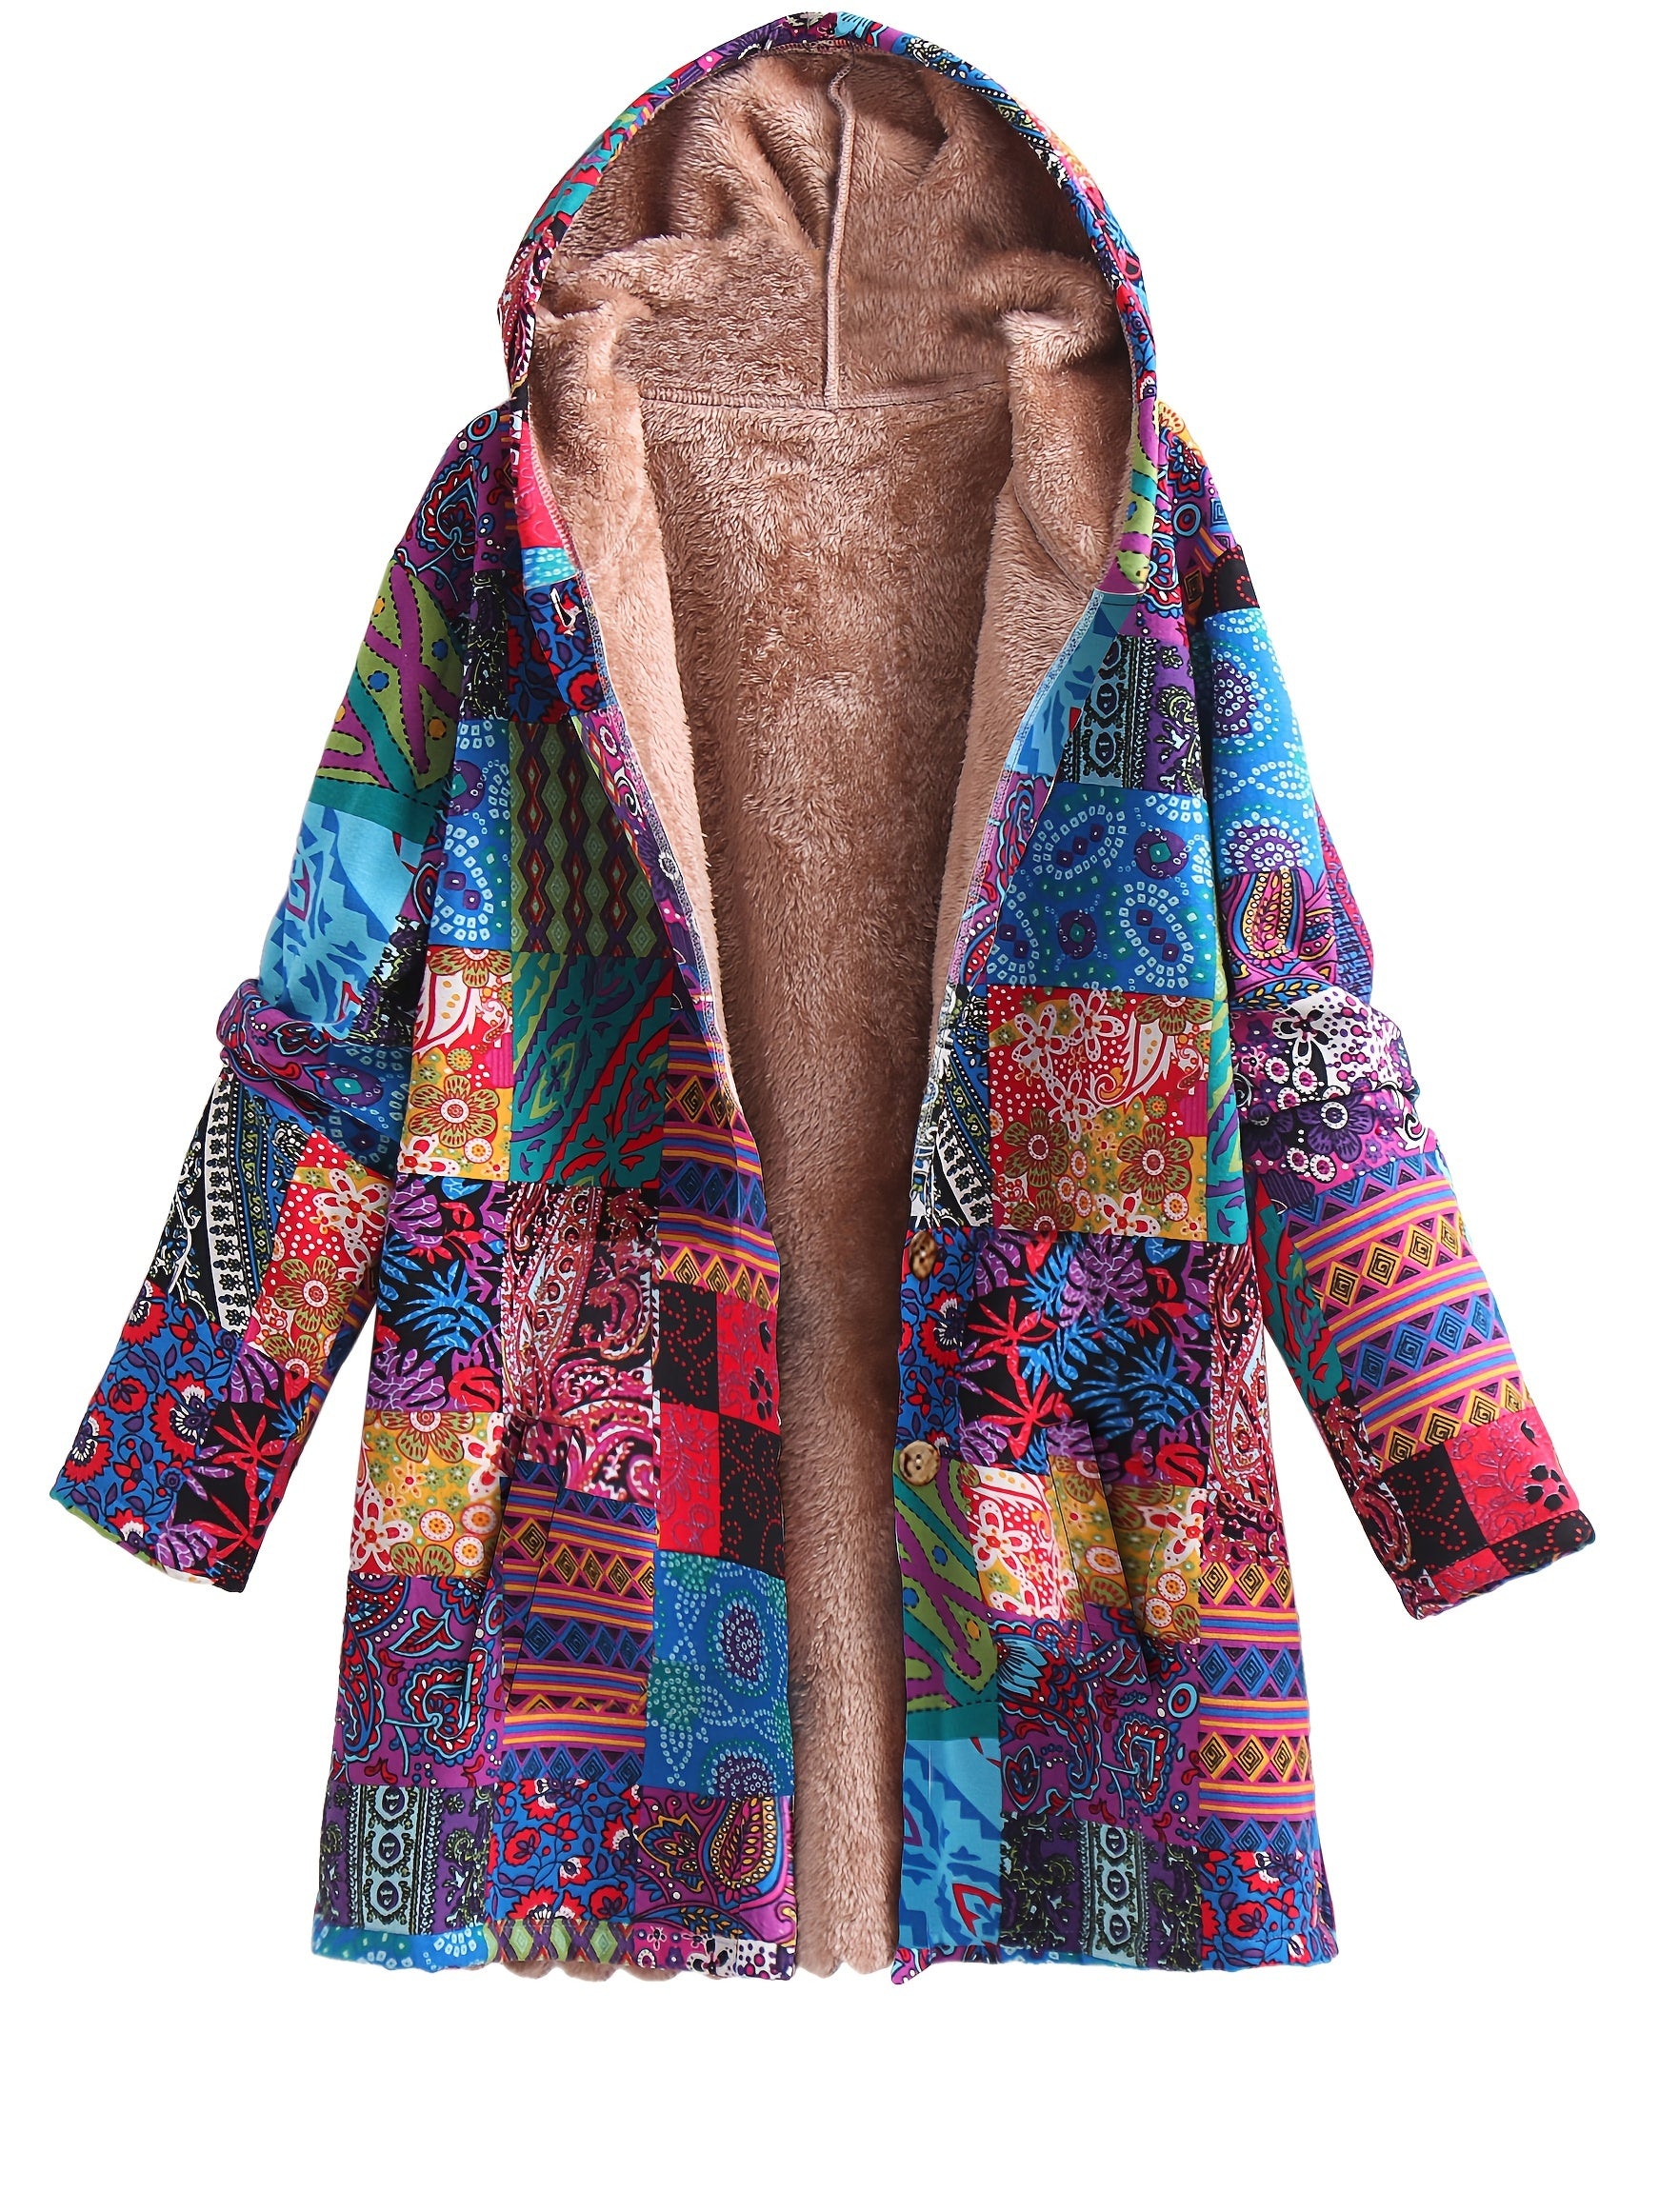 Plus Size Boho Coat, Women's Plus Patchwork Print Liner Fleece Long Sleeve Button Up Hooded Tunic Coat With Pockets